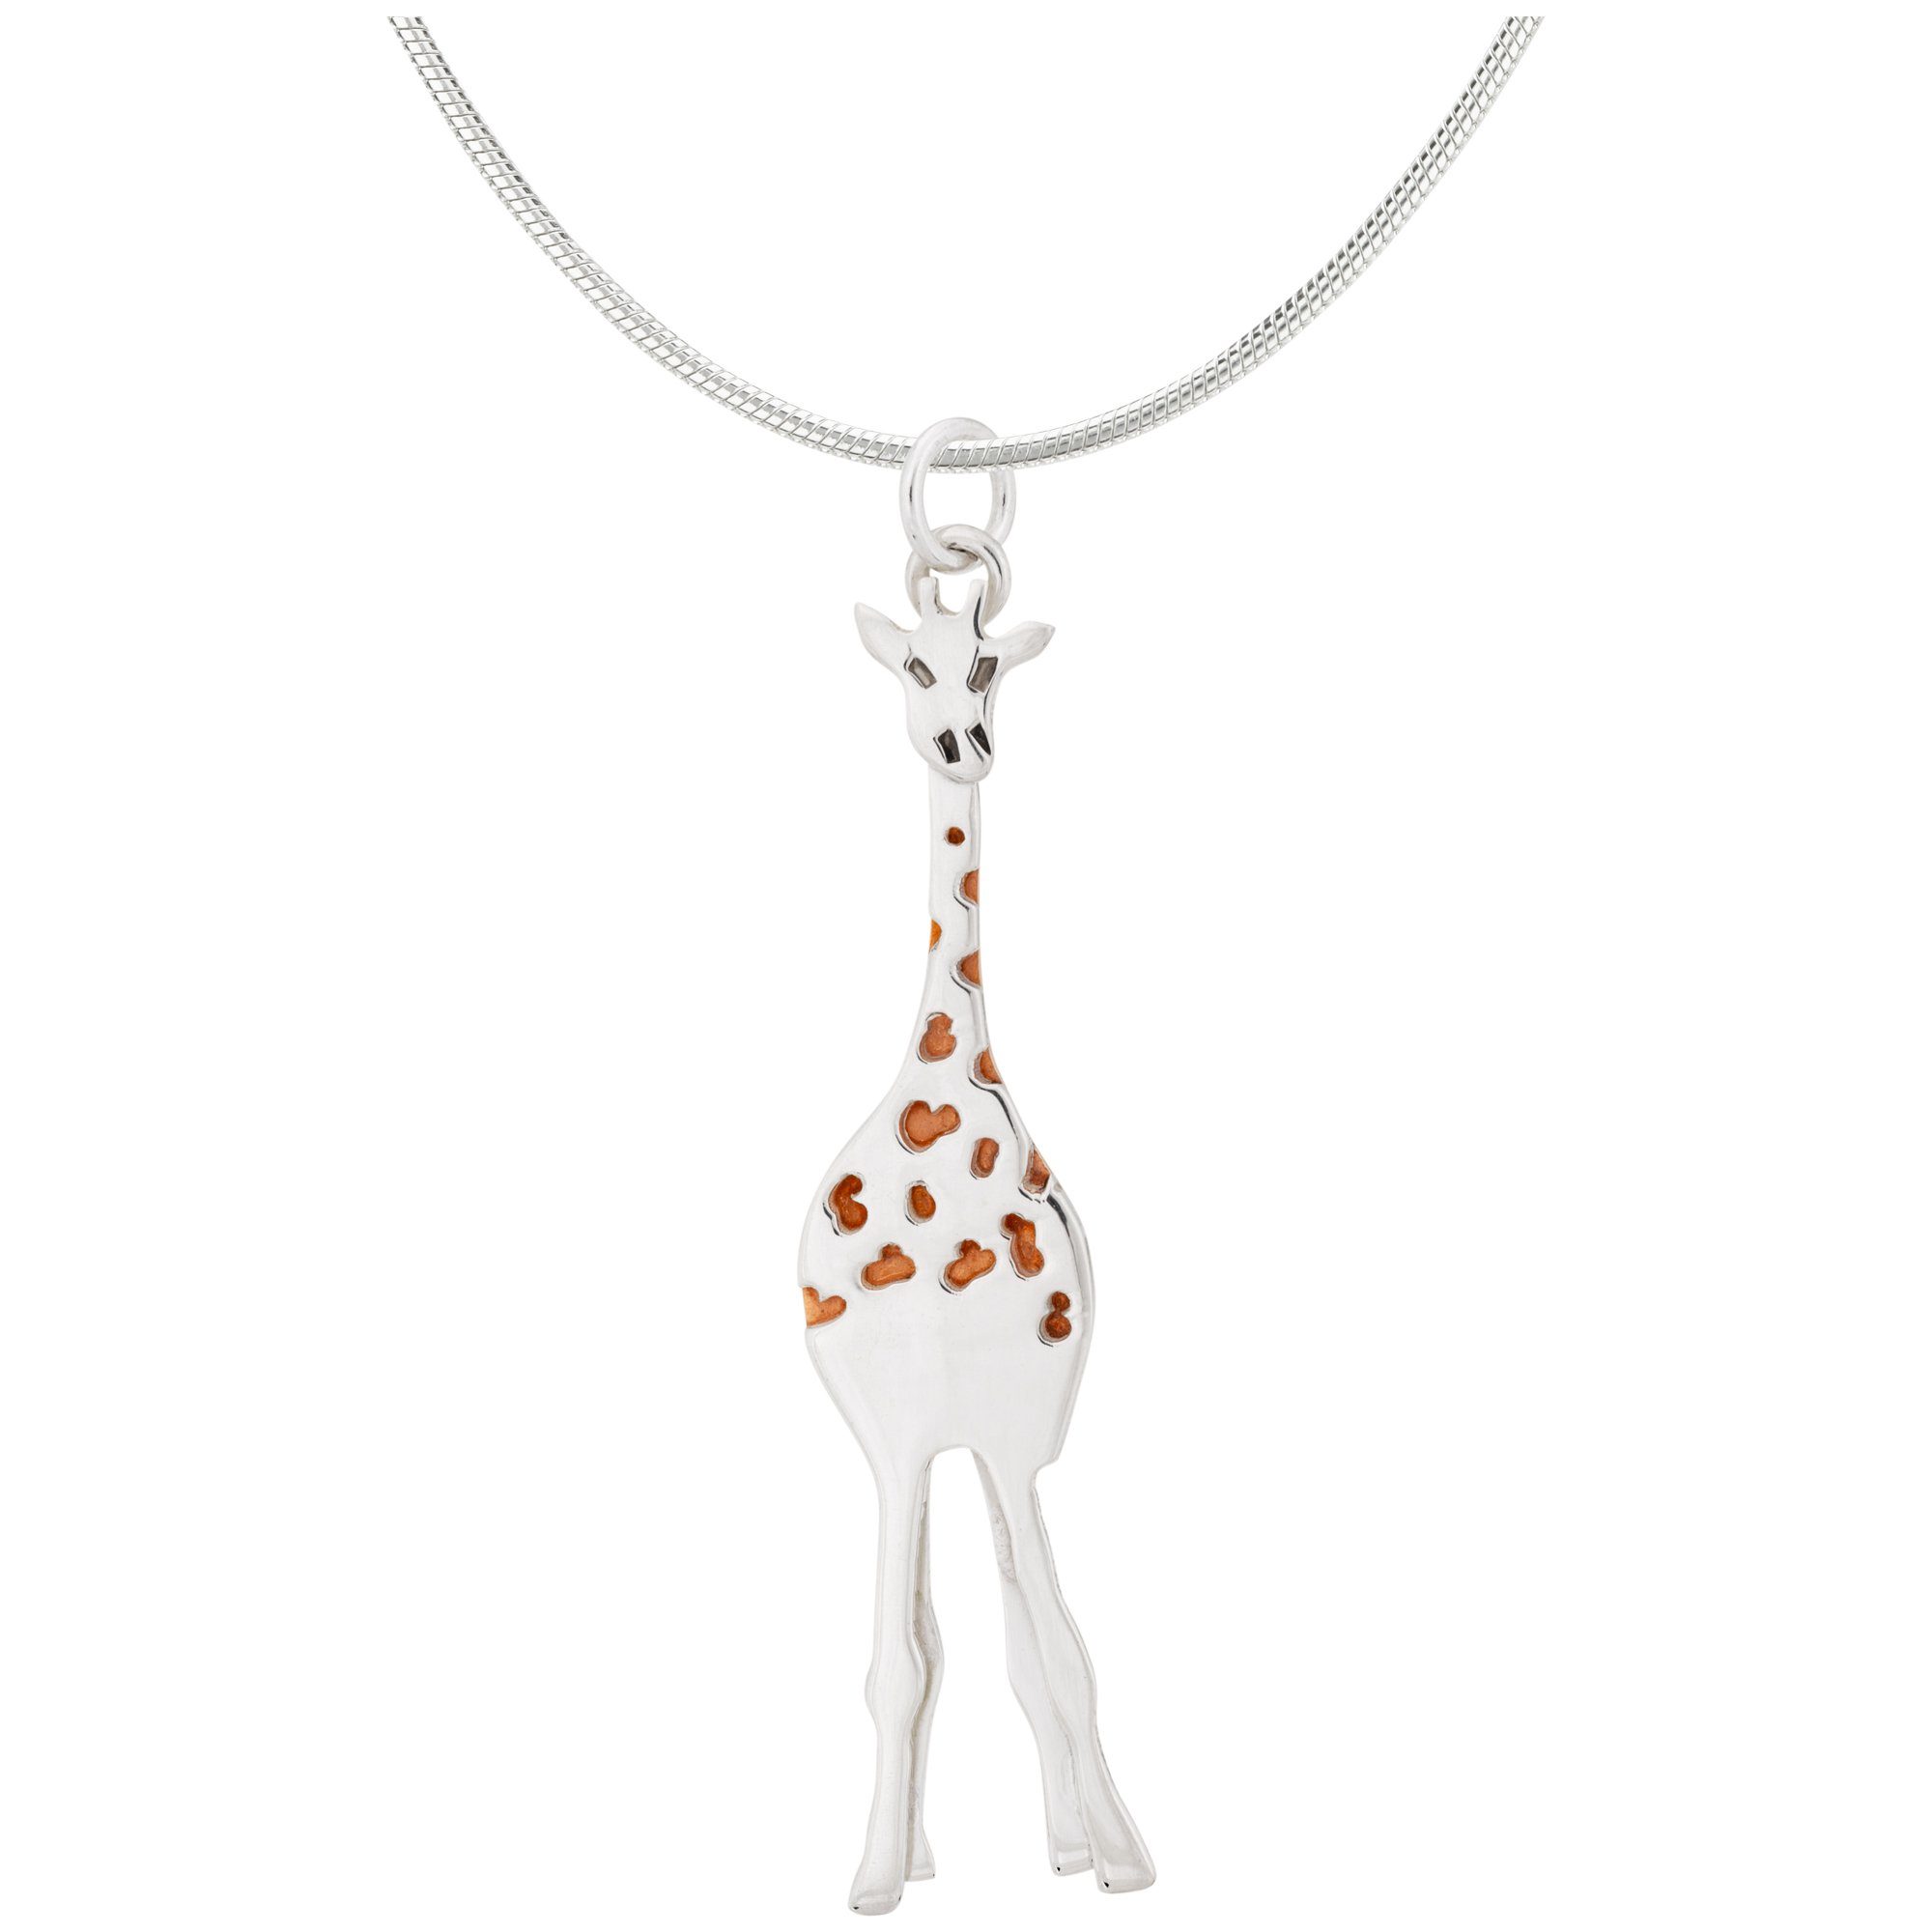 Gentle Giraffe Mixed Metal Necklace - Pendant Only